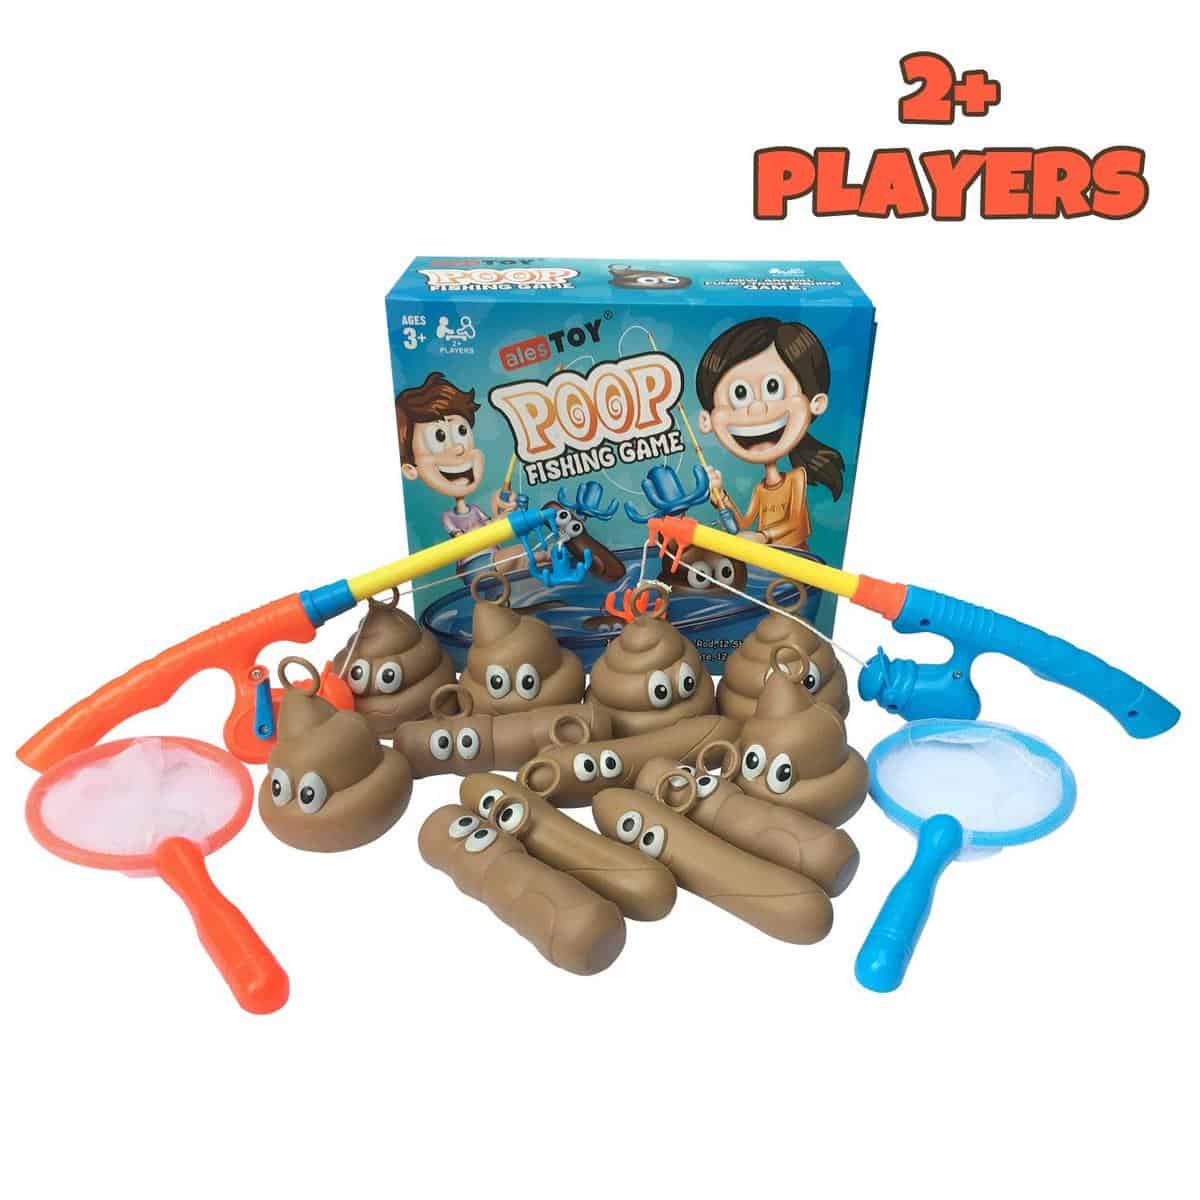 Creative Family Game Includes One Toilet,Two Launchers and 12 Soft Toy  Poops,Gift for Kids 4 5 6 7 8 Year Old